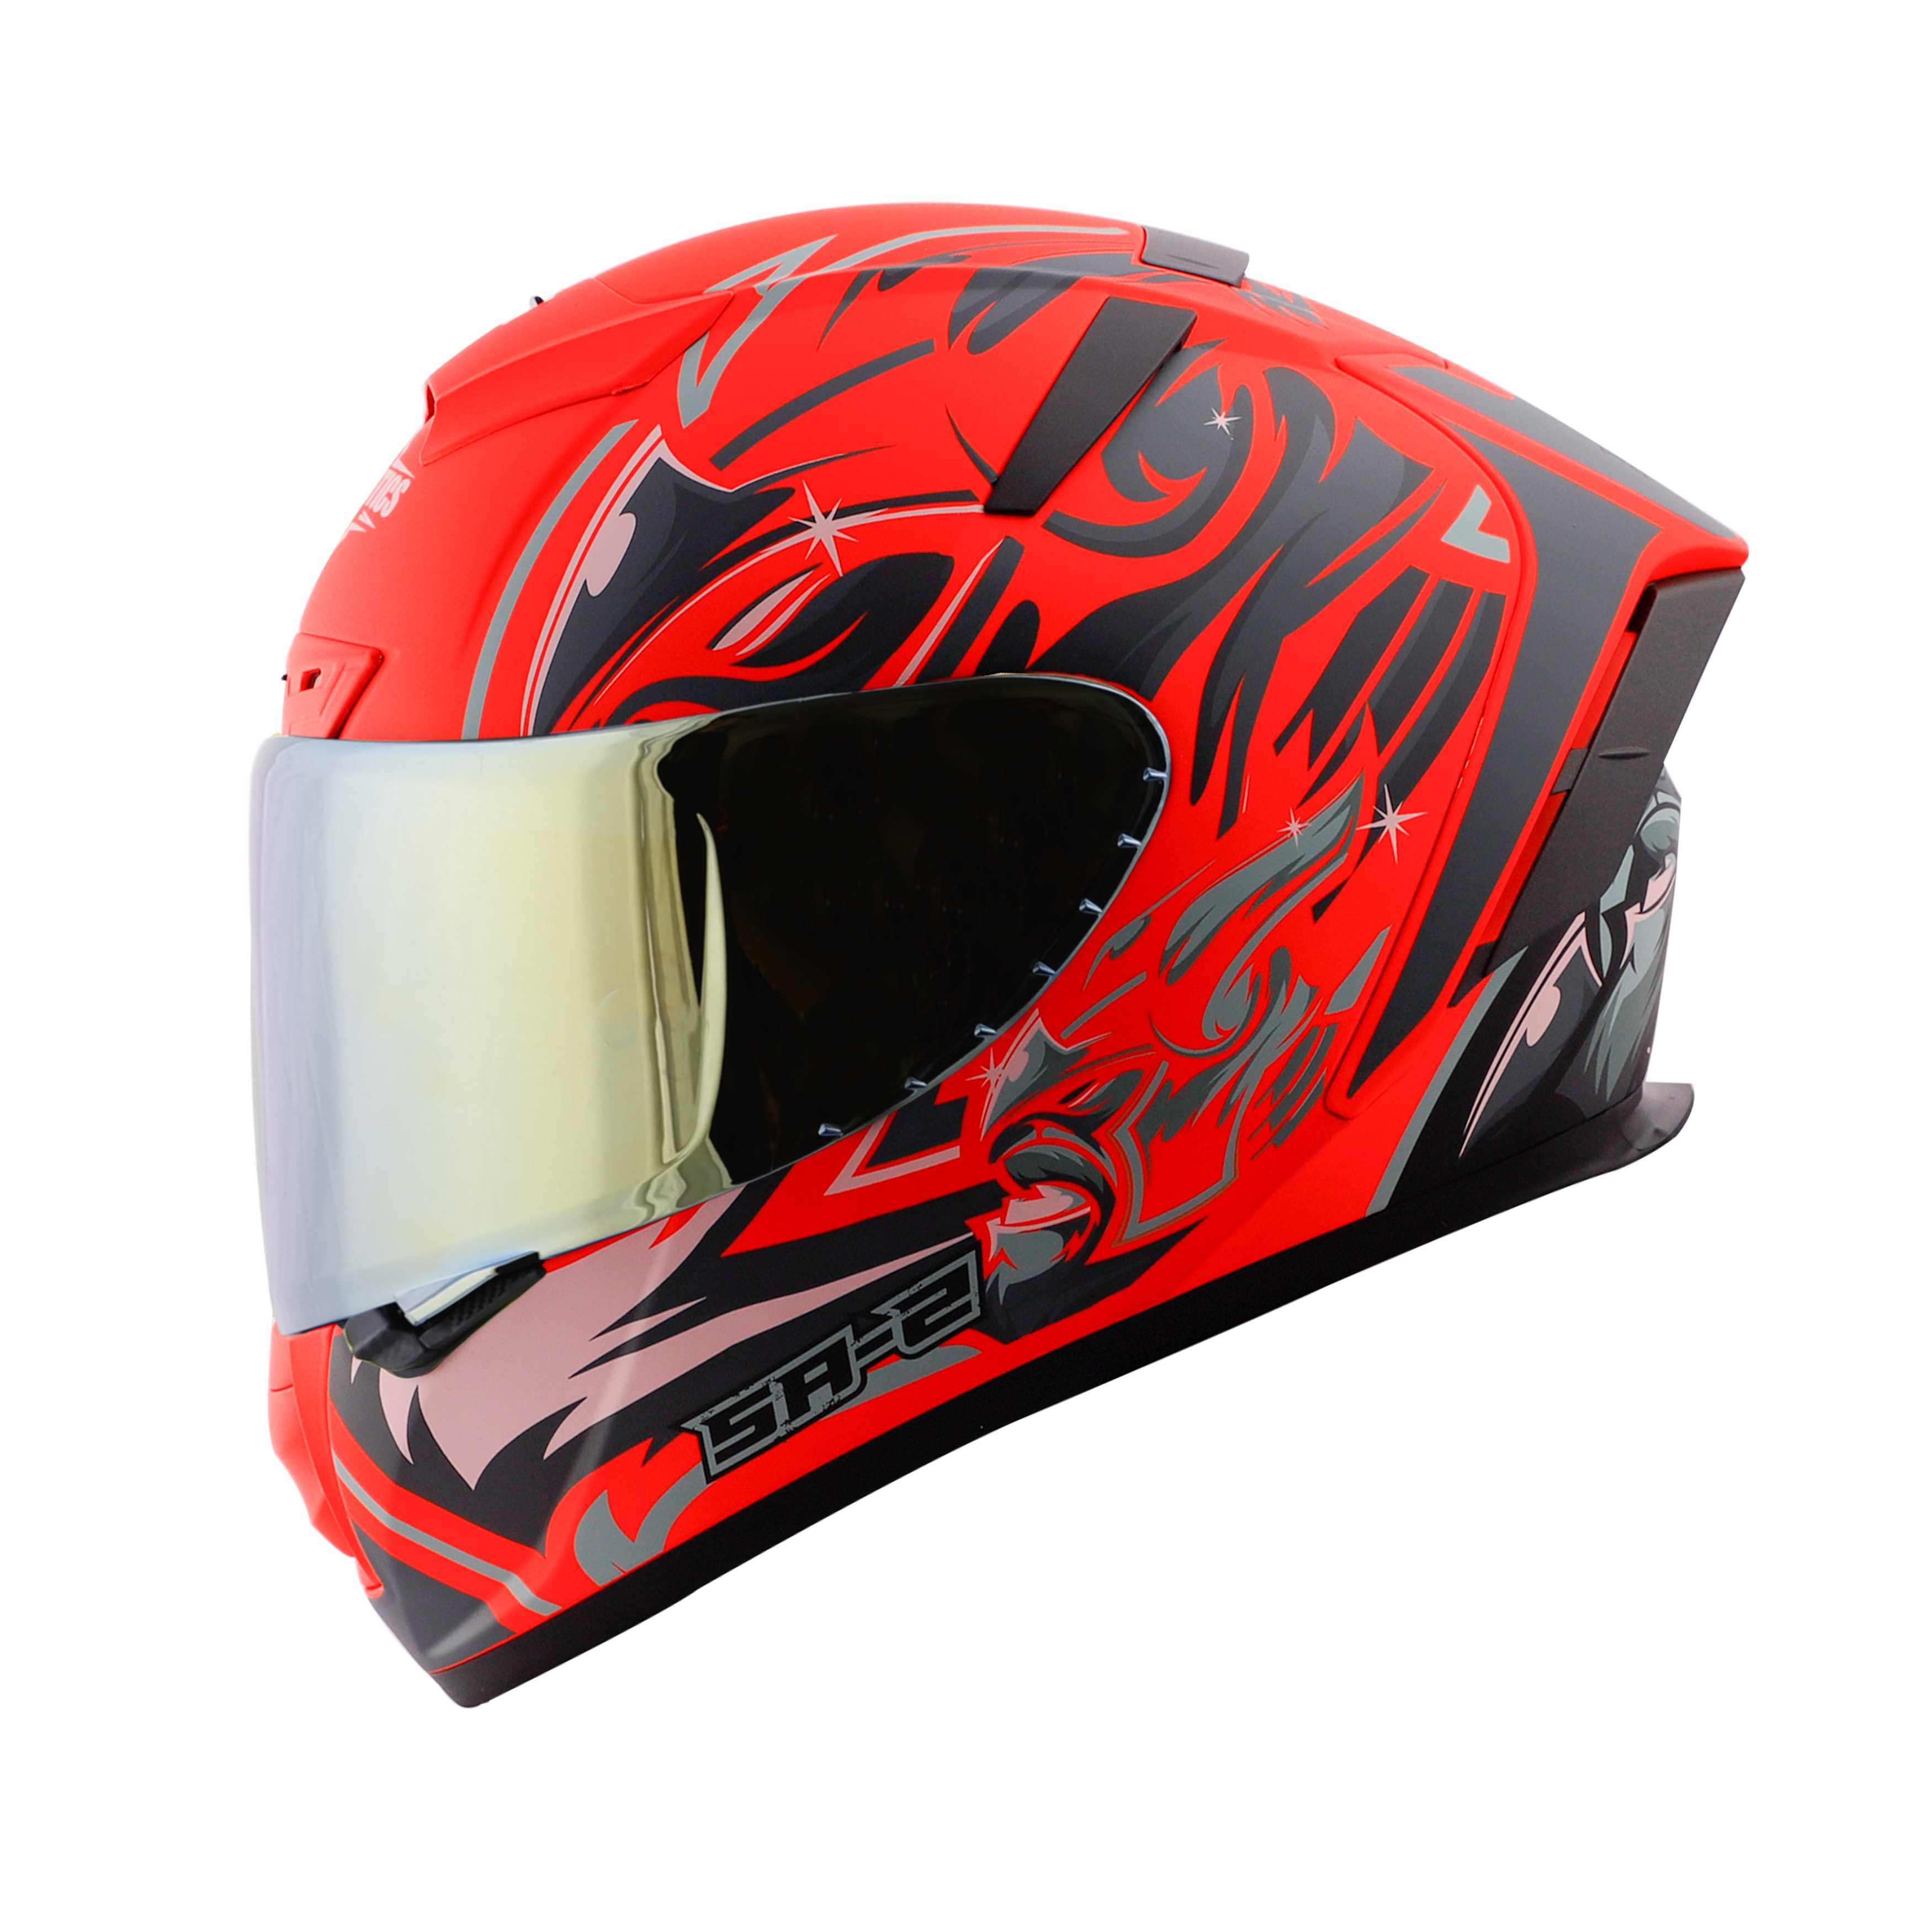 SA-2 VILLAIN GLOSSY FLUO RED WITH GREY (FITTED WITH CLEAR VISOR EXTRA GOLD CHROME VISOR FREE)